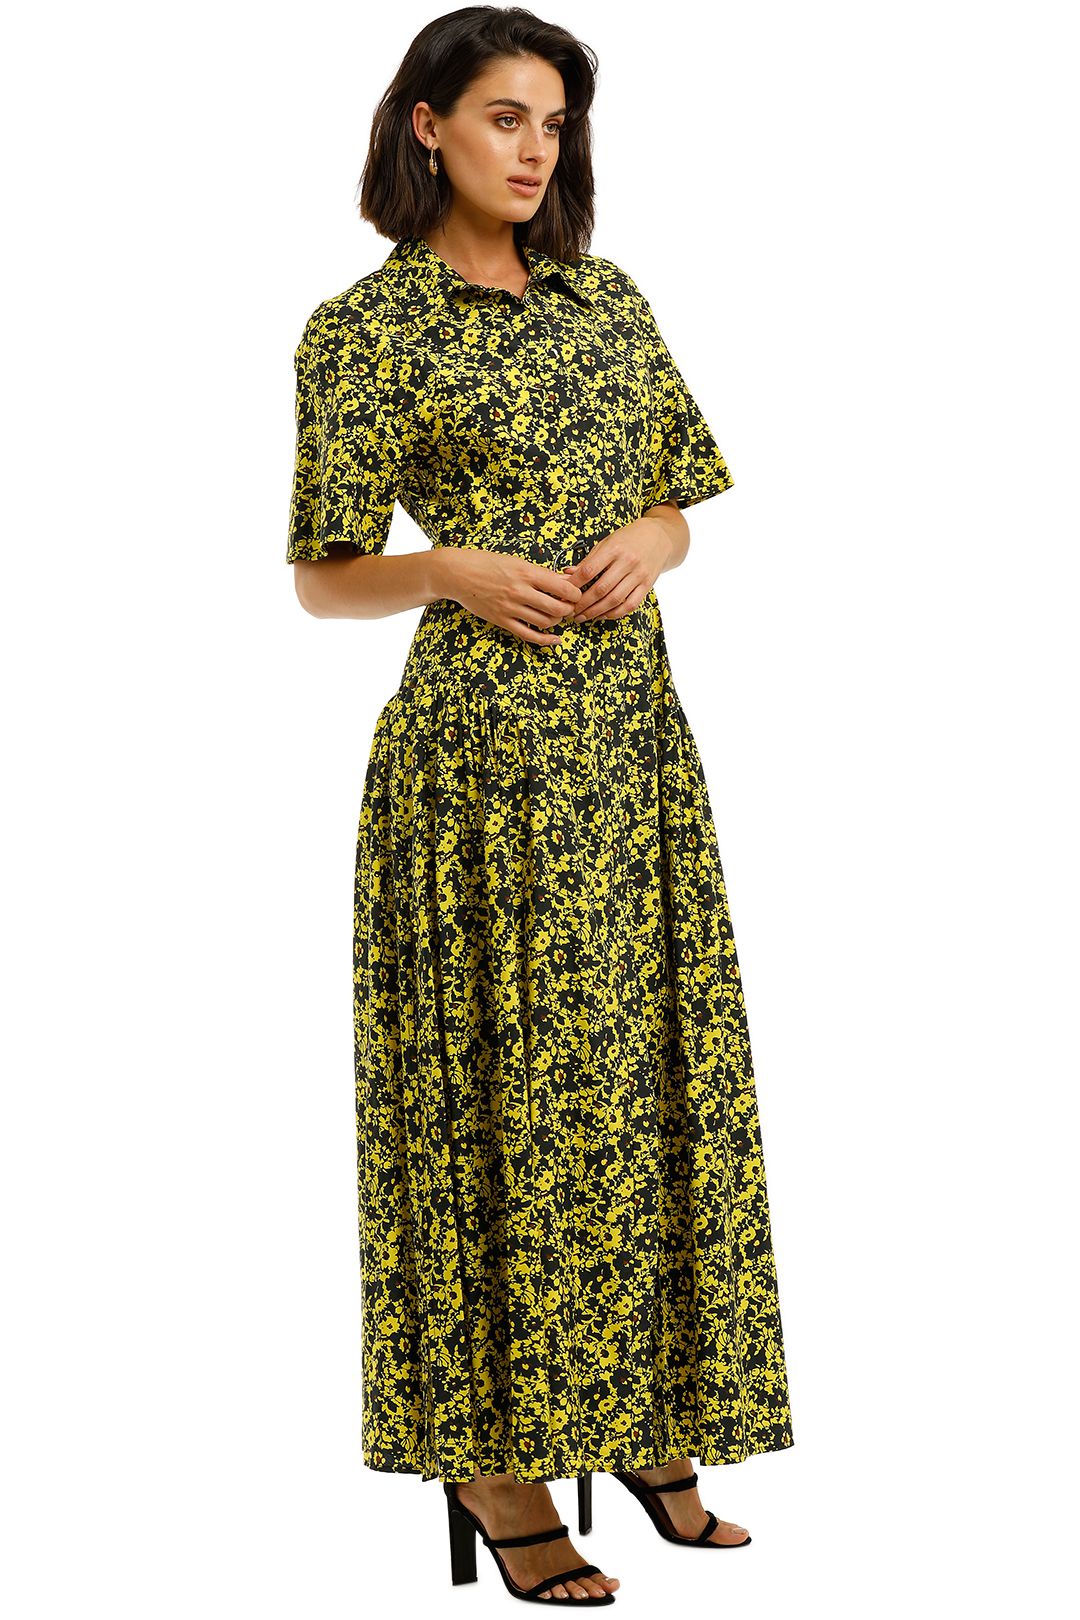 Camilla-and-Marc-Monet-Dress-Yellow-Side